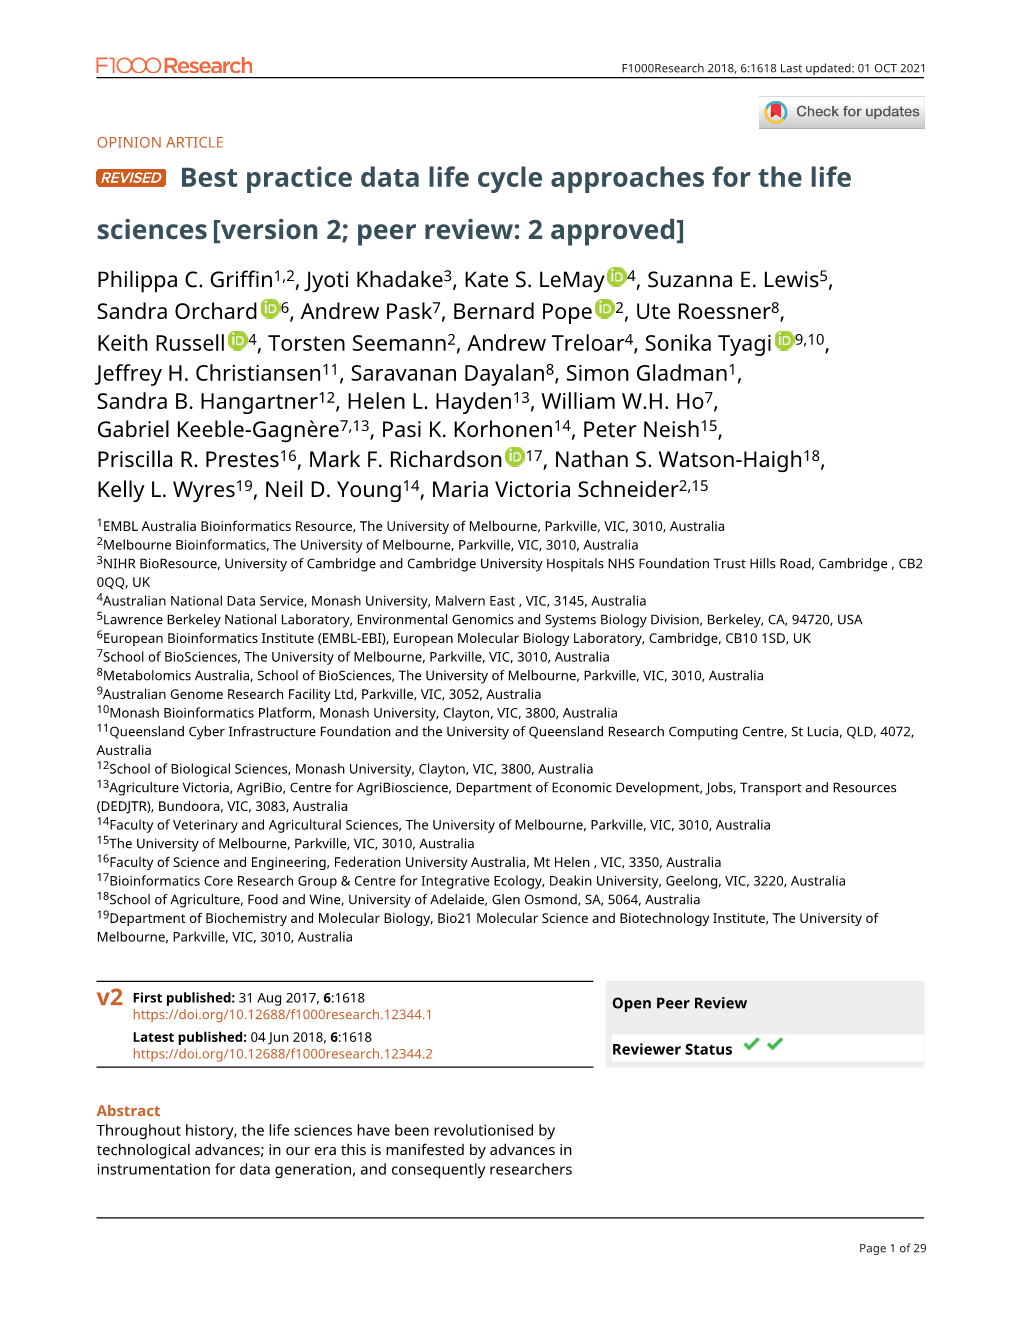 Best Practice Data Life Cycle Approaches for the Life Sciences [Version 2; Peer Review: 2 Approved]